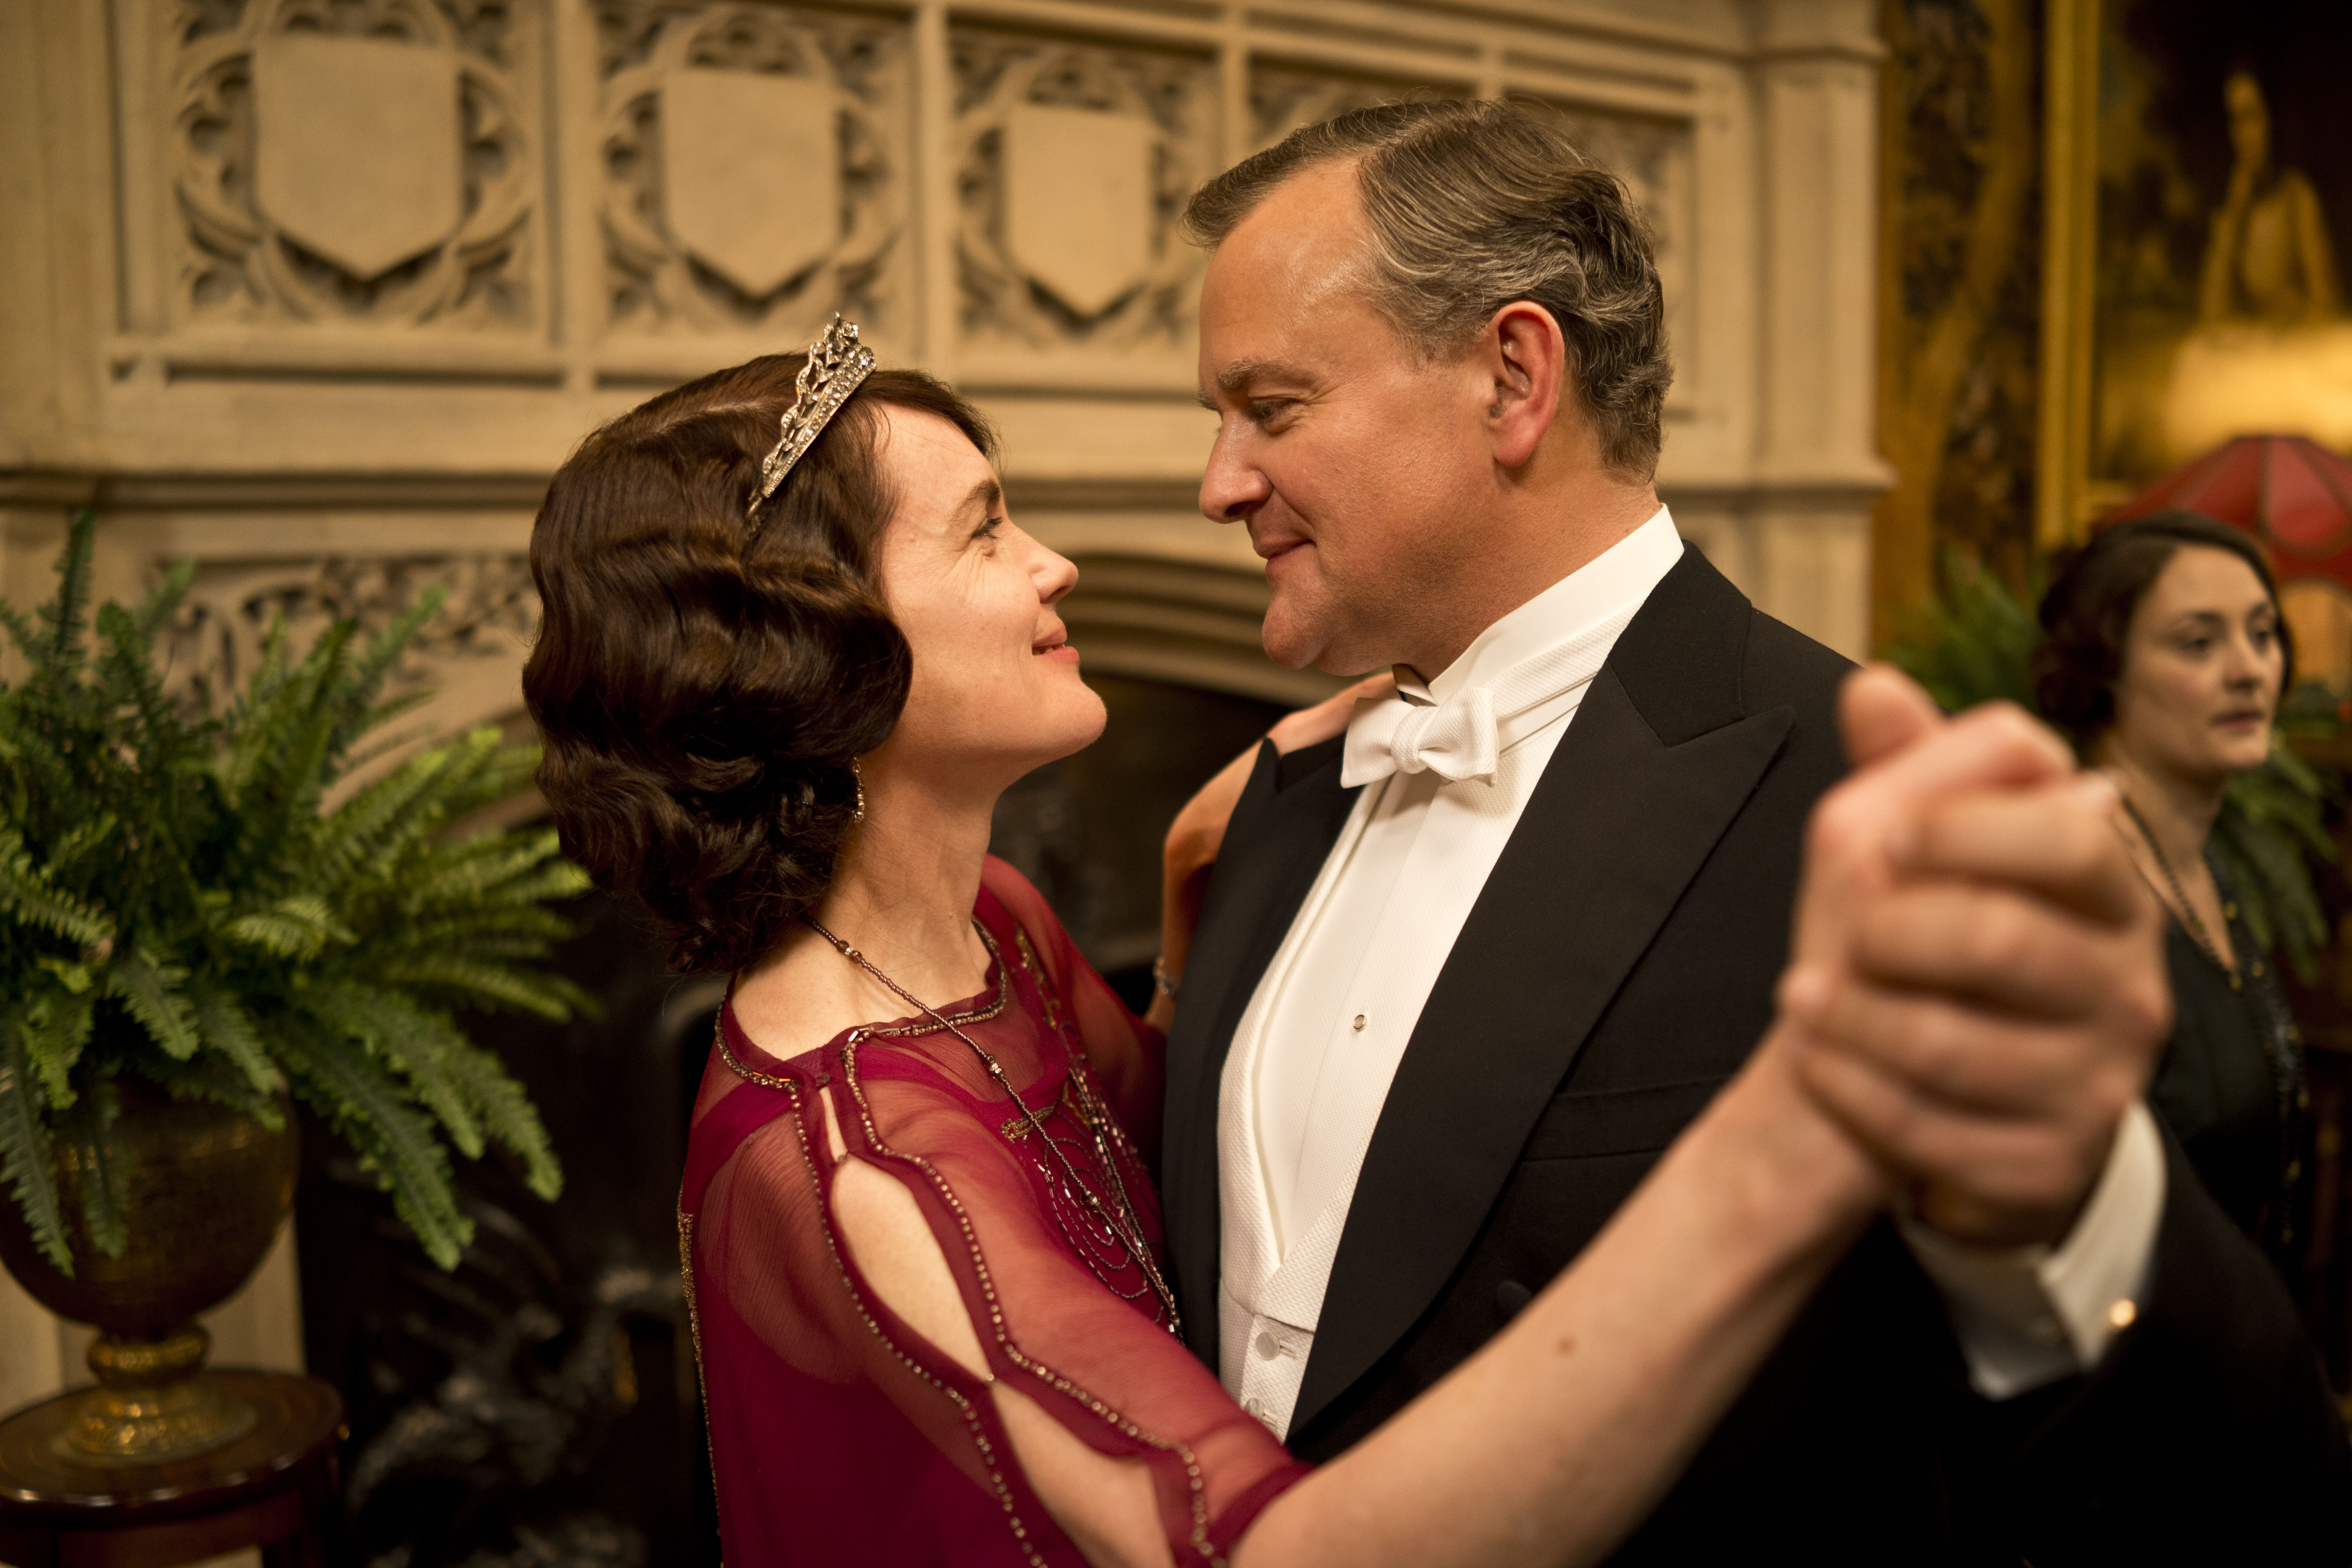 Gasp! Jazz at Downton Abbey! (Photo: Courtesy of ©Nick Briggs/Carnival Film and Television Limited 2013 for MASTERPIECE)